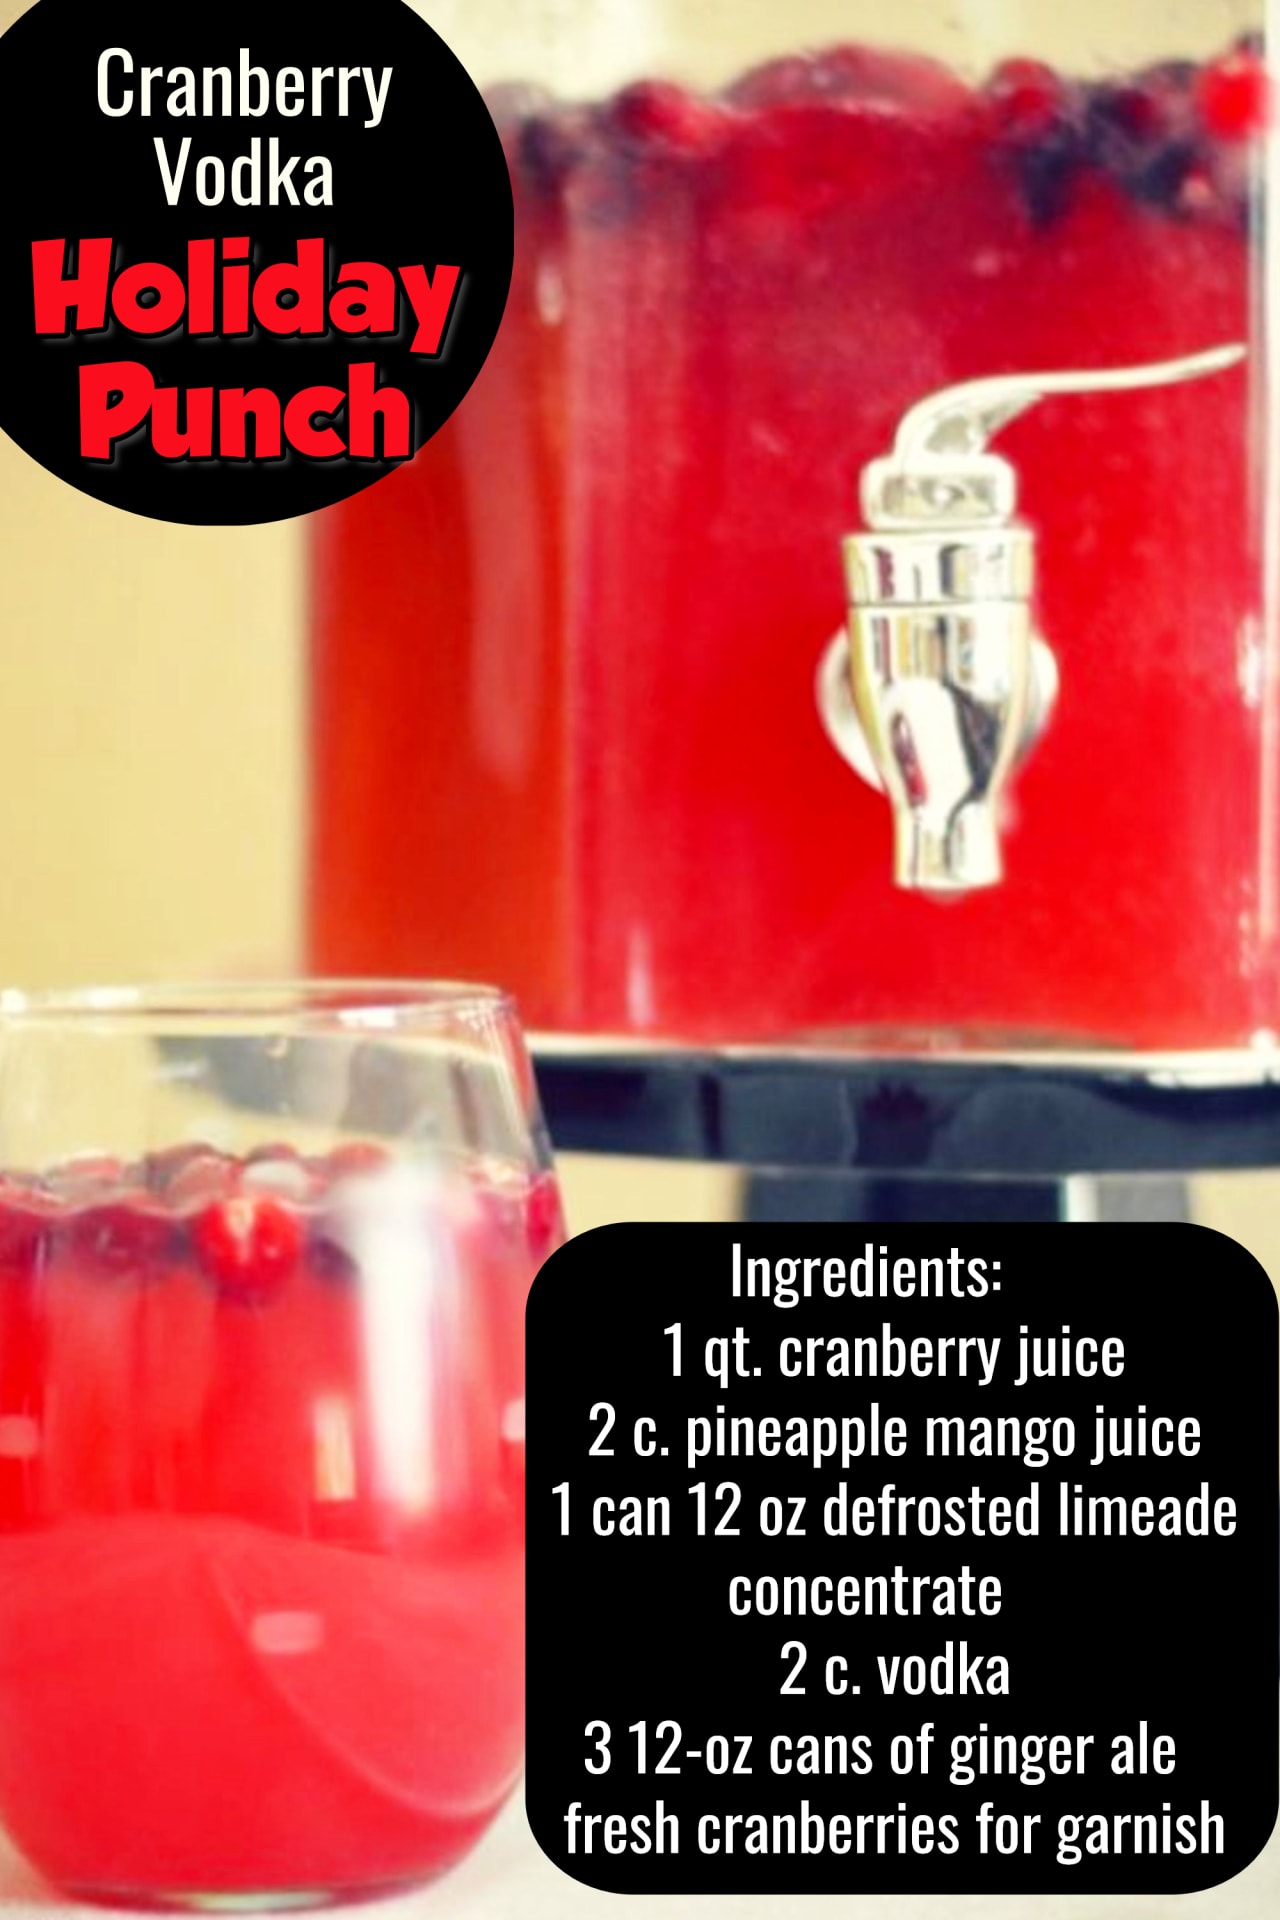 Cranberry Vodka Punch Recipe - Easy Punch Recipes for a Crowd and Easy Party Drinks Ideas - Cranberry Vodka Punch, Pineapple Orange Juice Alcoholic Drinks, Punch for 50 and Simple Punch Recipes for a Crowd, Party, Brunch, Cookout or Bridal Shower - non-alcoholic punch recipes and simple alcoholic punch recipes, non-alcoholic holiday punch, easy fruit punch recipes, easy punch recipes with sprite and pineapple juice, jungle juice recipe with fruit